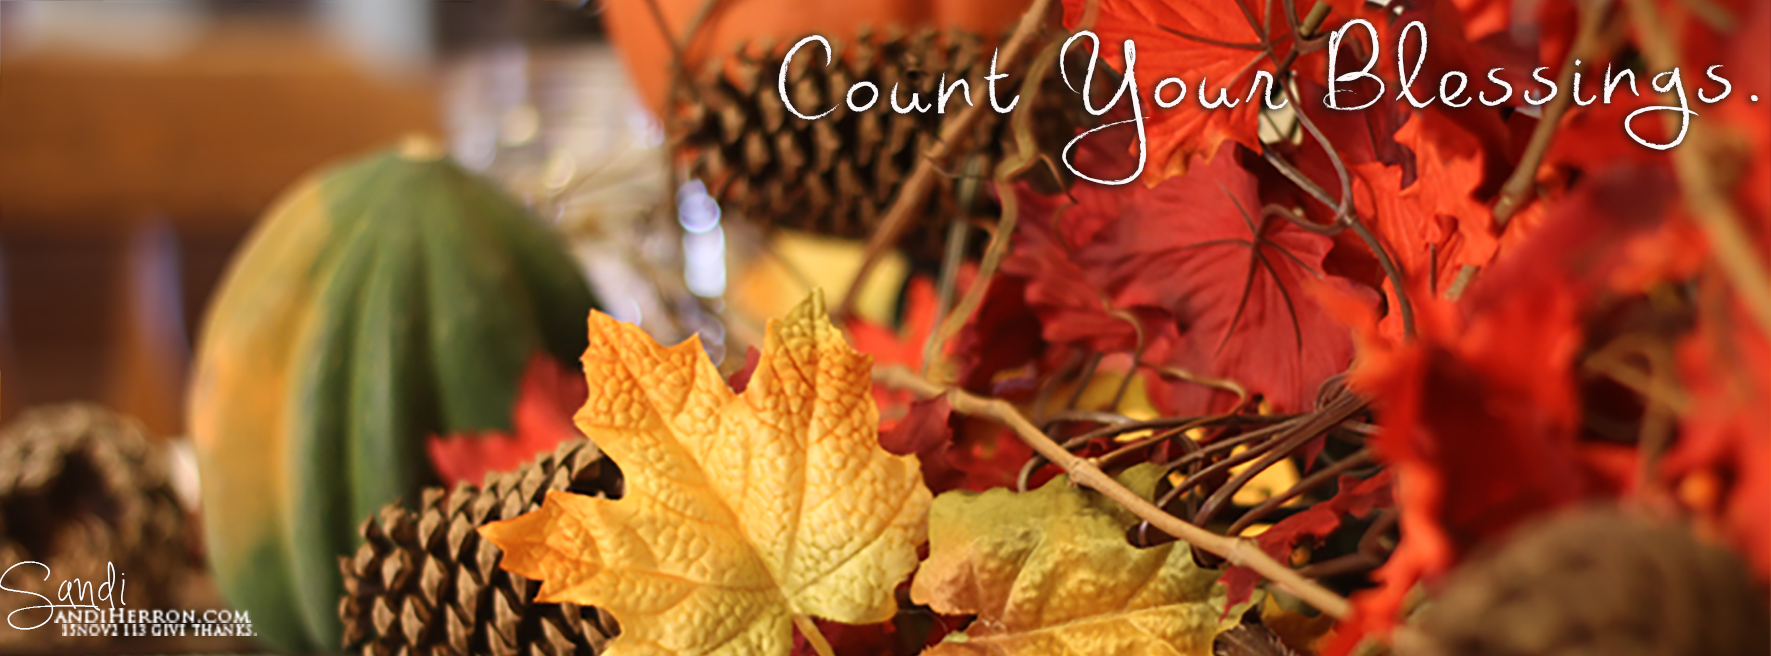 Thanksgiving Pictures For Facebook Cover